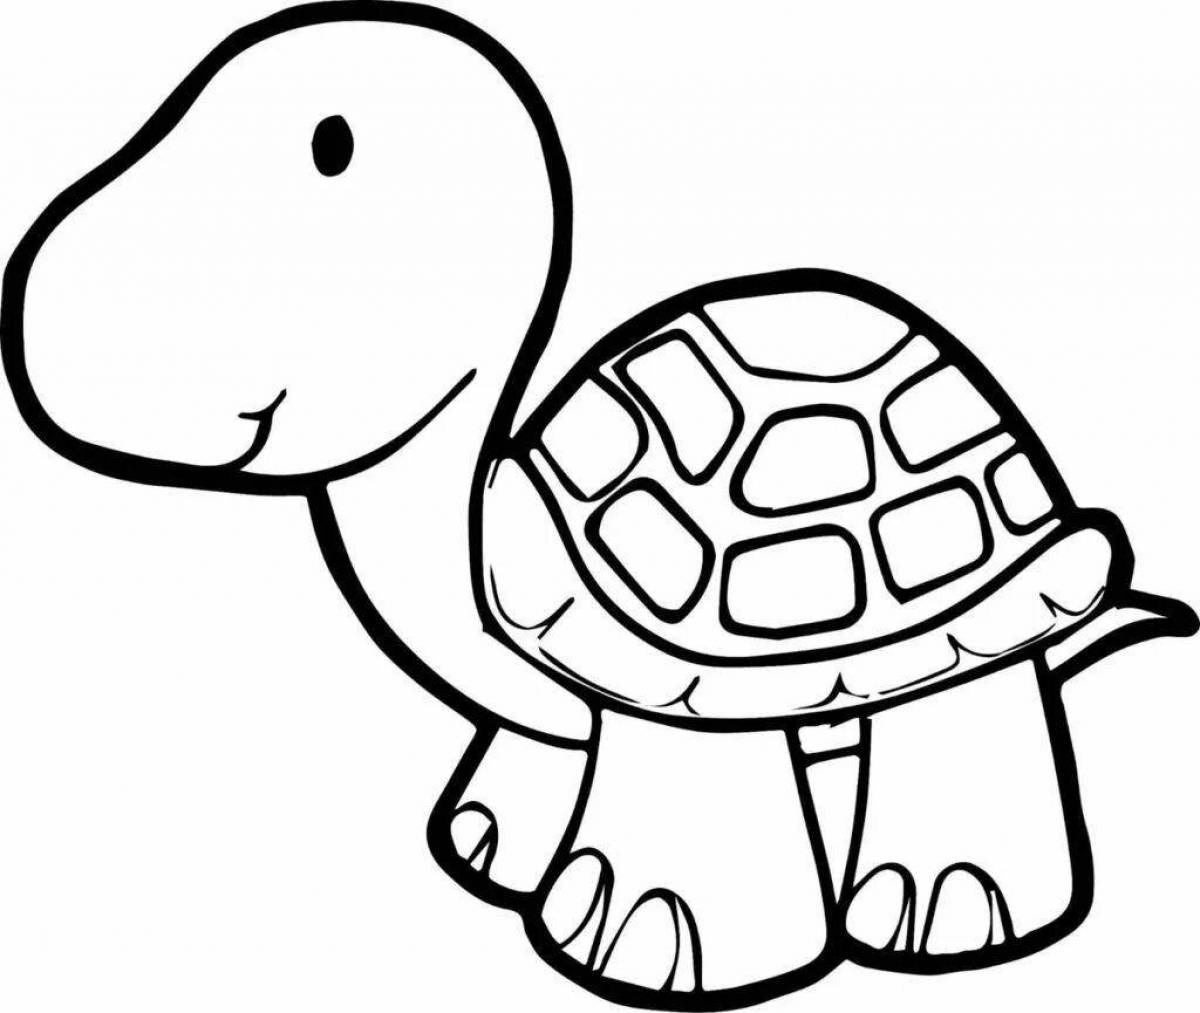 Colouring turtle for kids